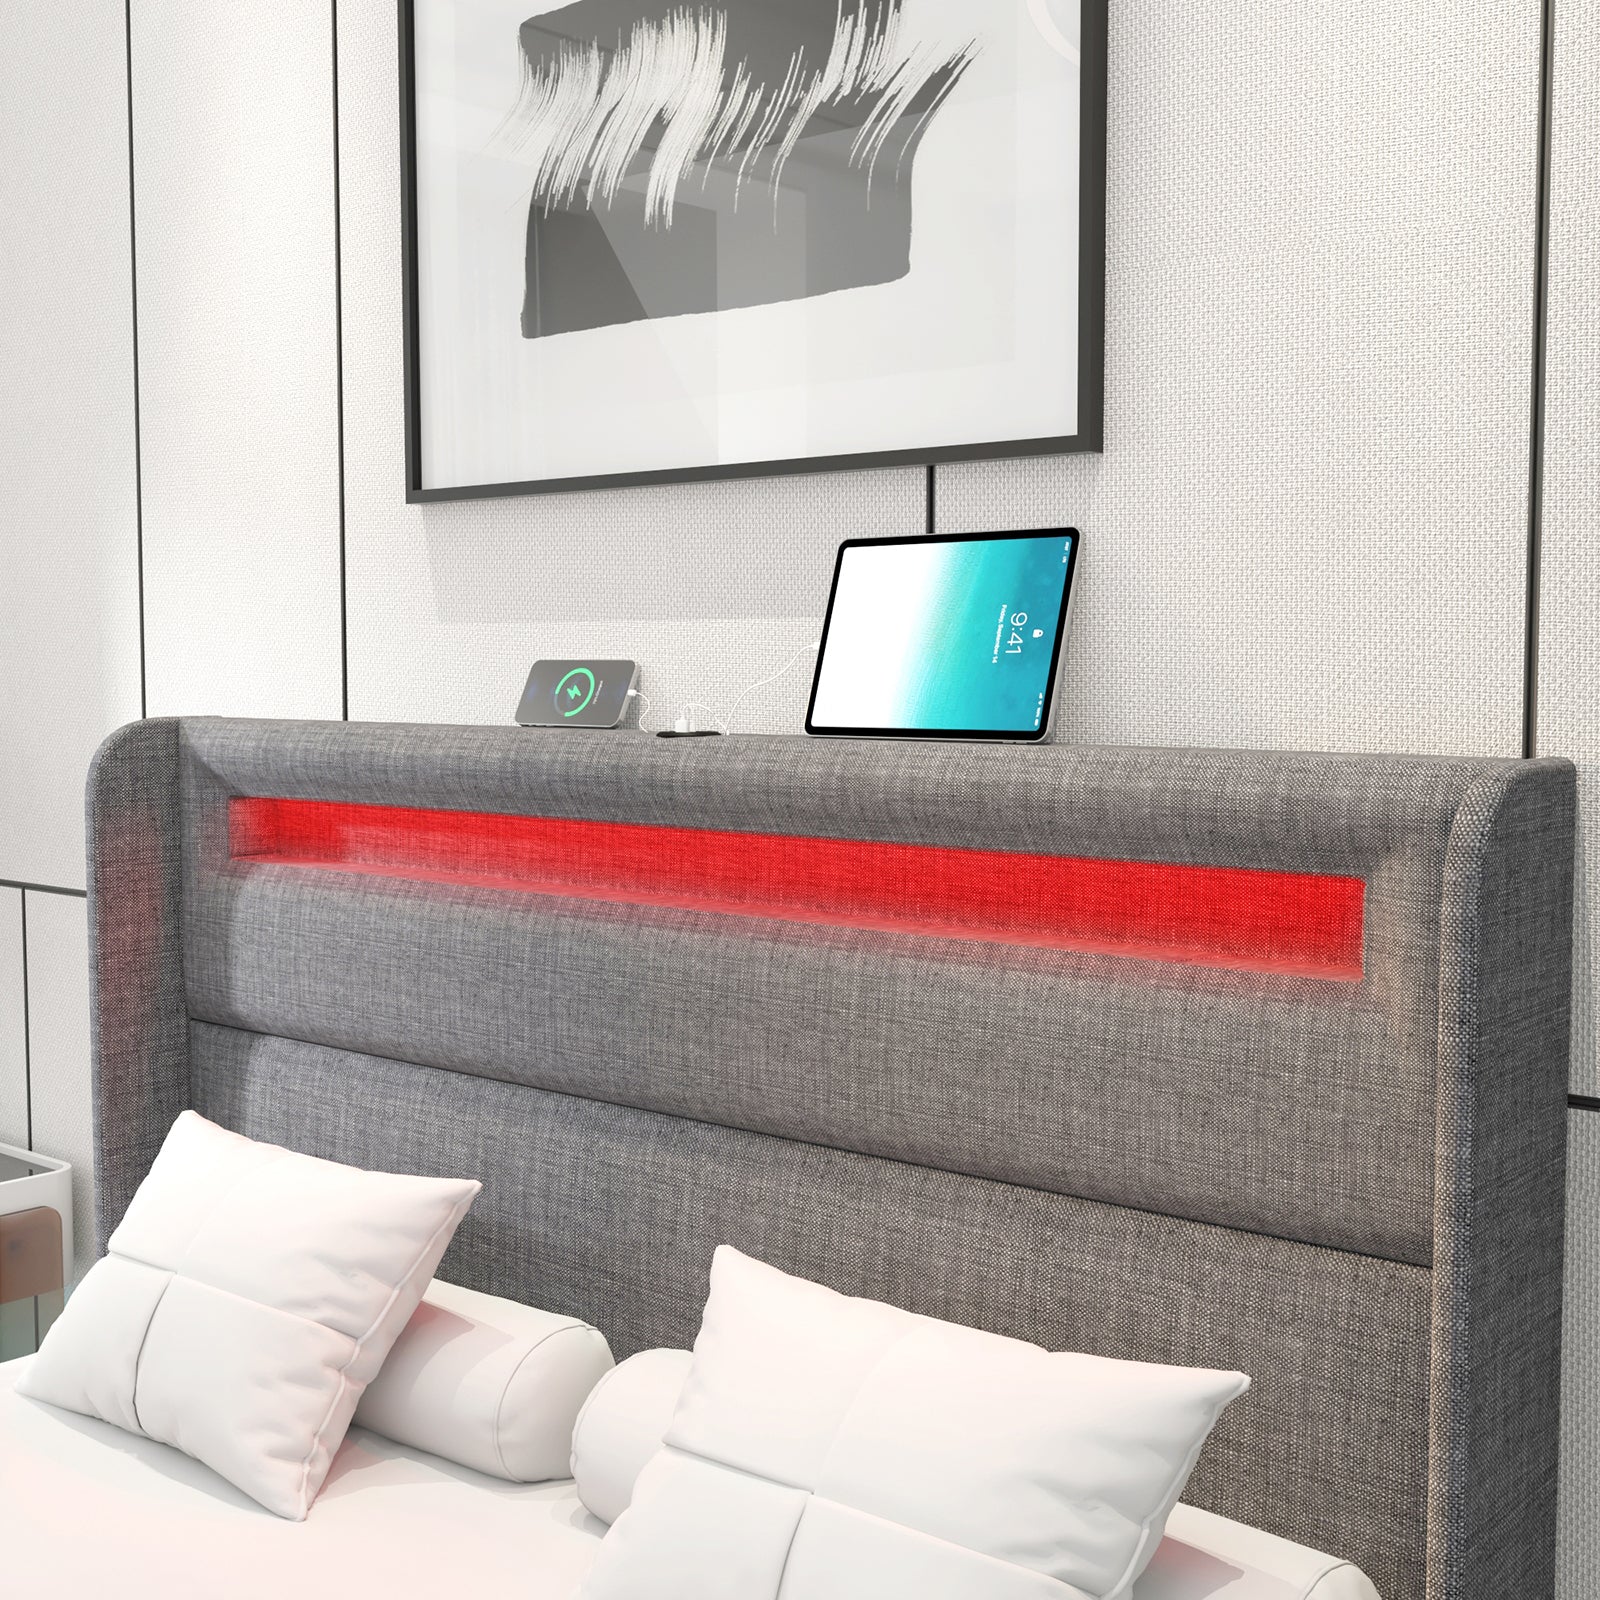 A close up view of the light grey wingback headboard and the integrated rgb are illuminated in red